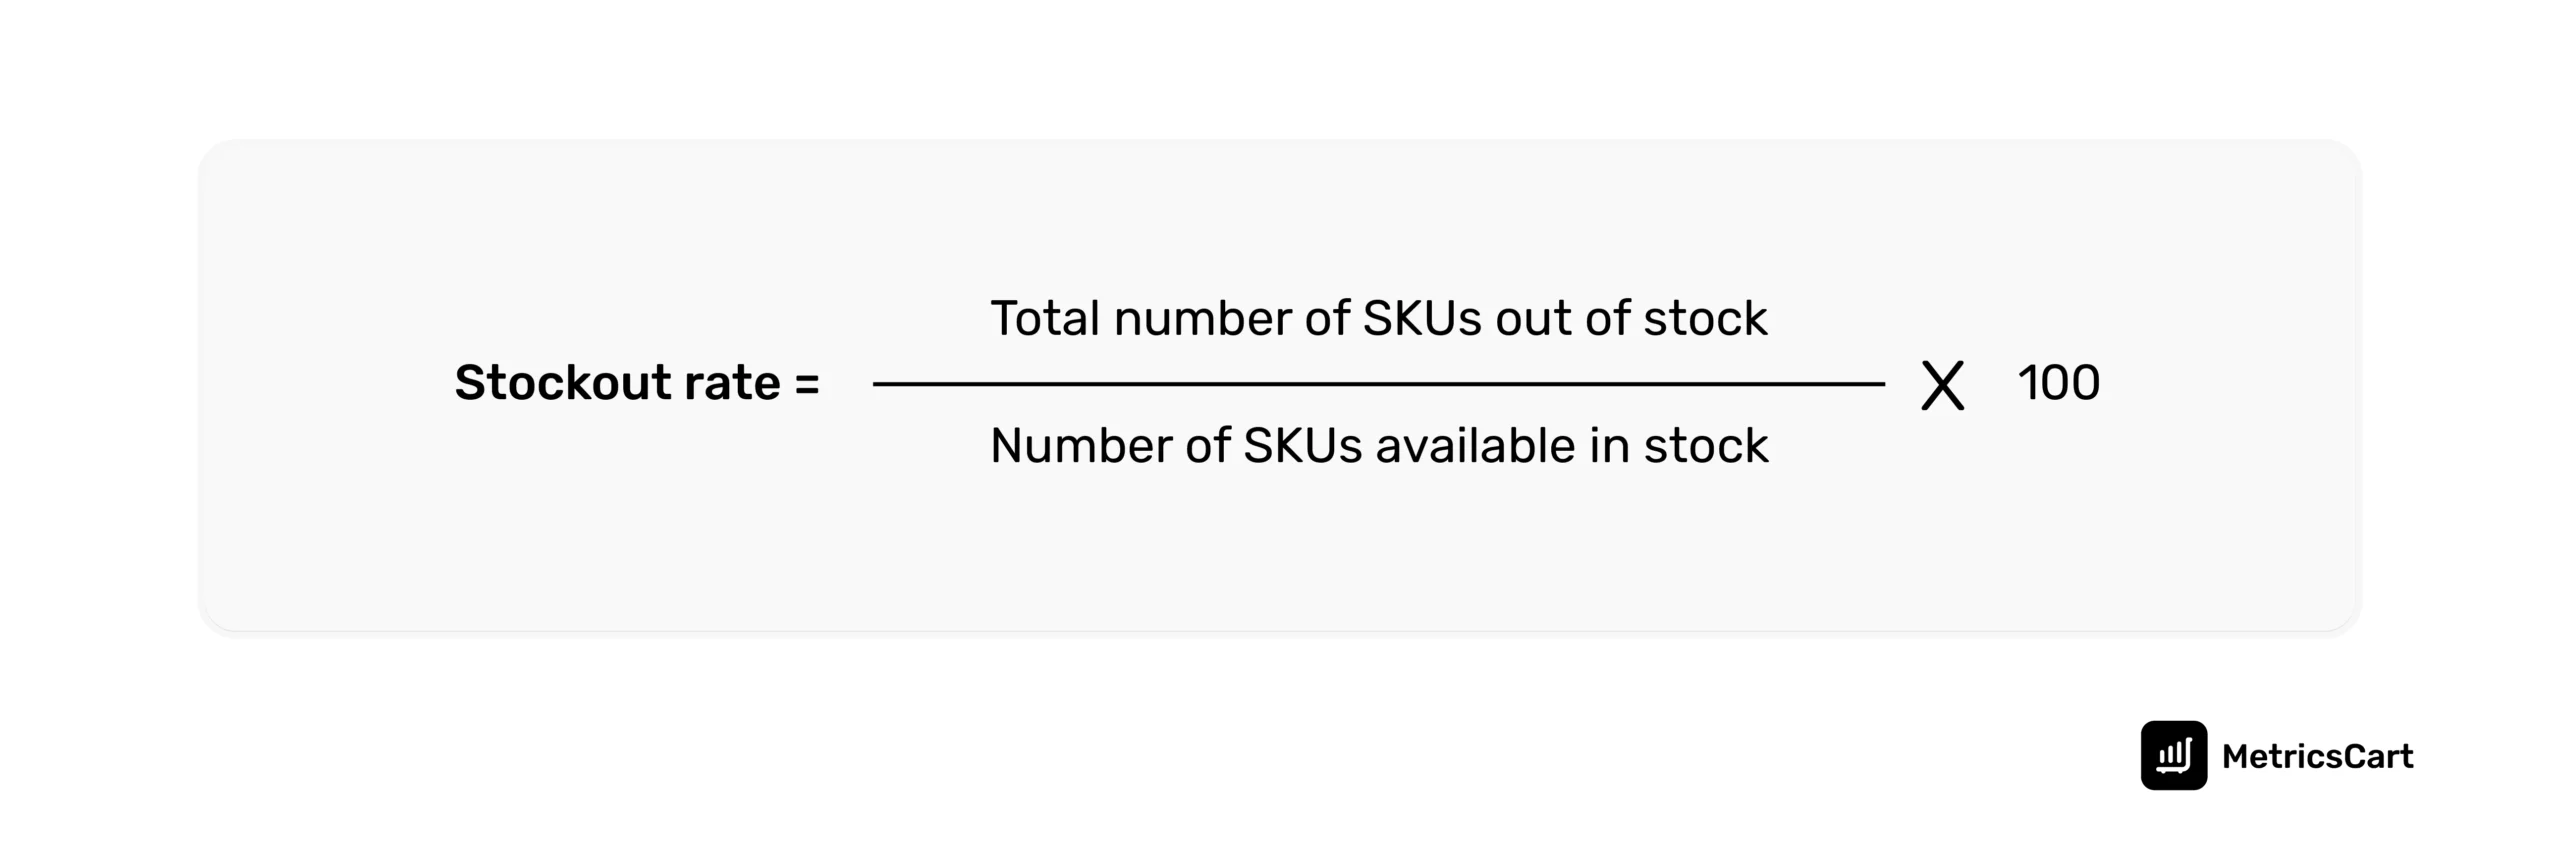 The image is showing how to calculate the stockout rate